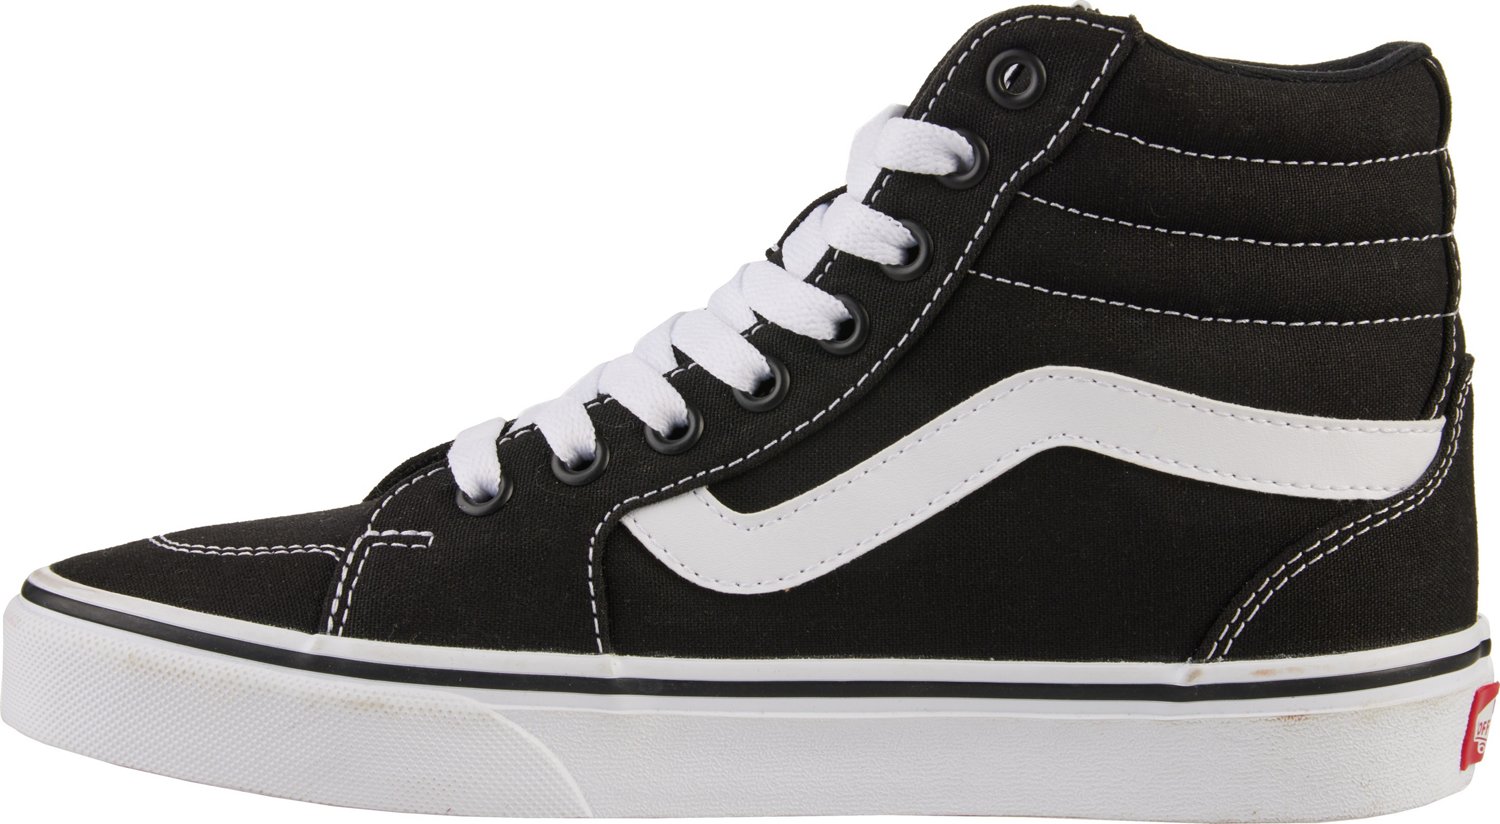 Vans Women's Filmore High-Top Shoes | Free Shipping at Academy